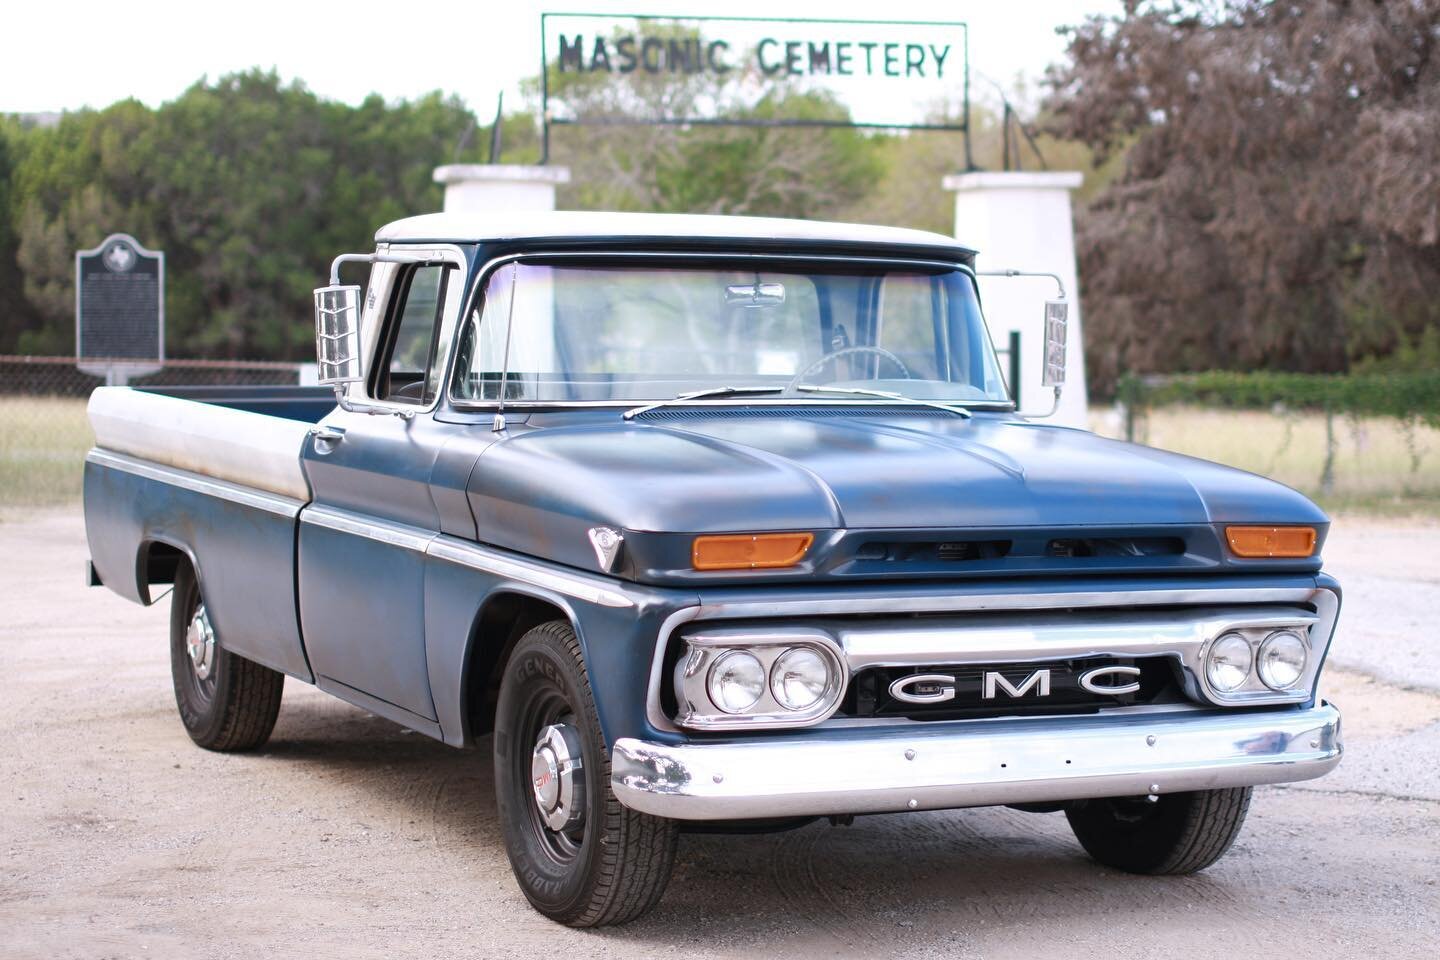 Getting ready to ship this beauty back home. It's been a challenging and rewarding project with a lot of new and advanced technology packed under its patina hood! Going to miss this one... #gmc #gmctrucks #classicgmc #chevy #chevytrucks #chevyc10 #cl